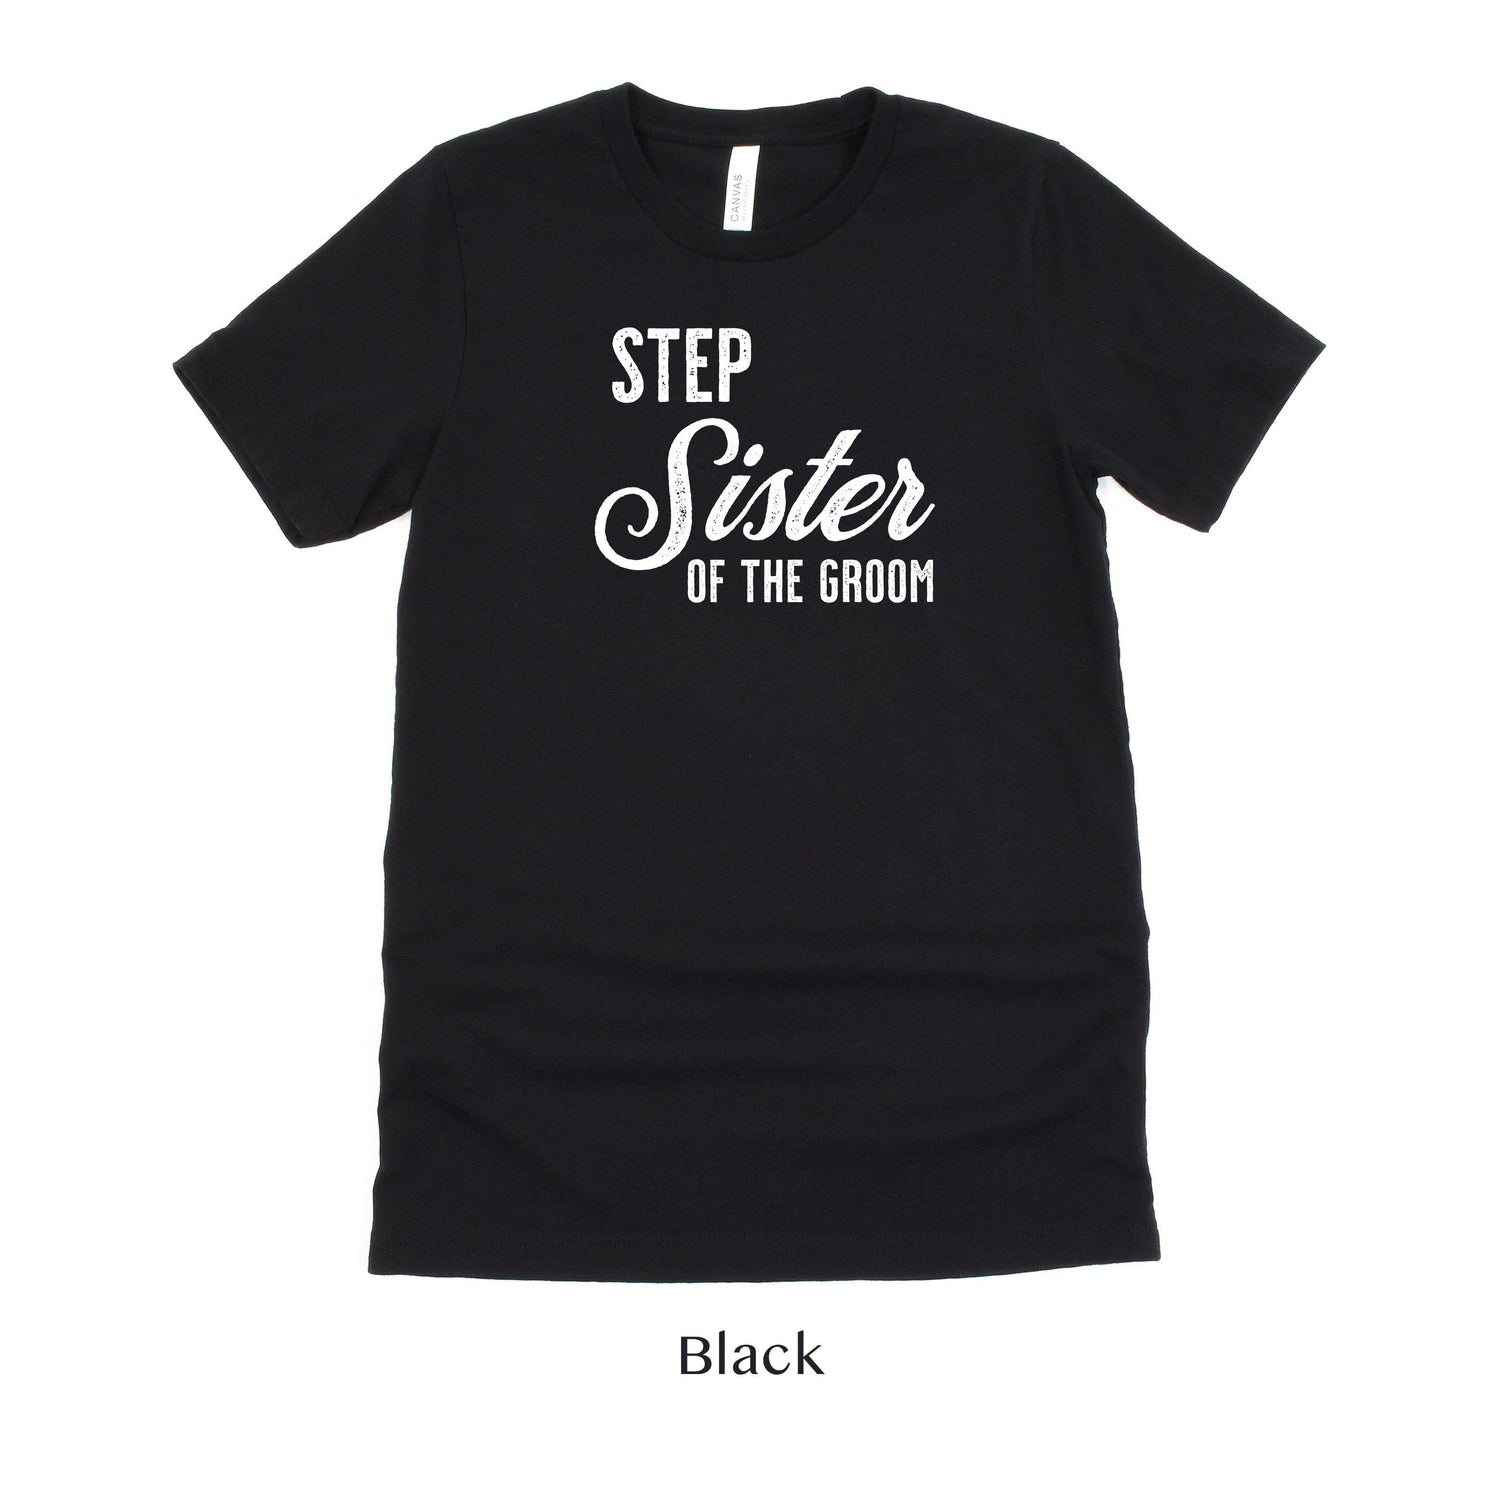 Step Sister of the Groom - Vintage Romance Wedding Party Unisex t-shirt by Oaklynn Lane